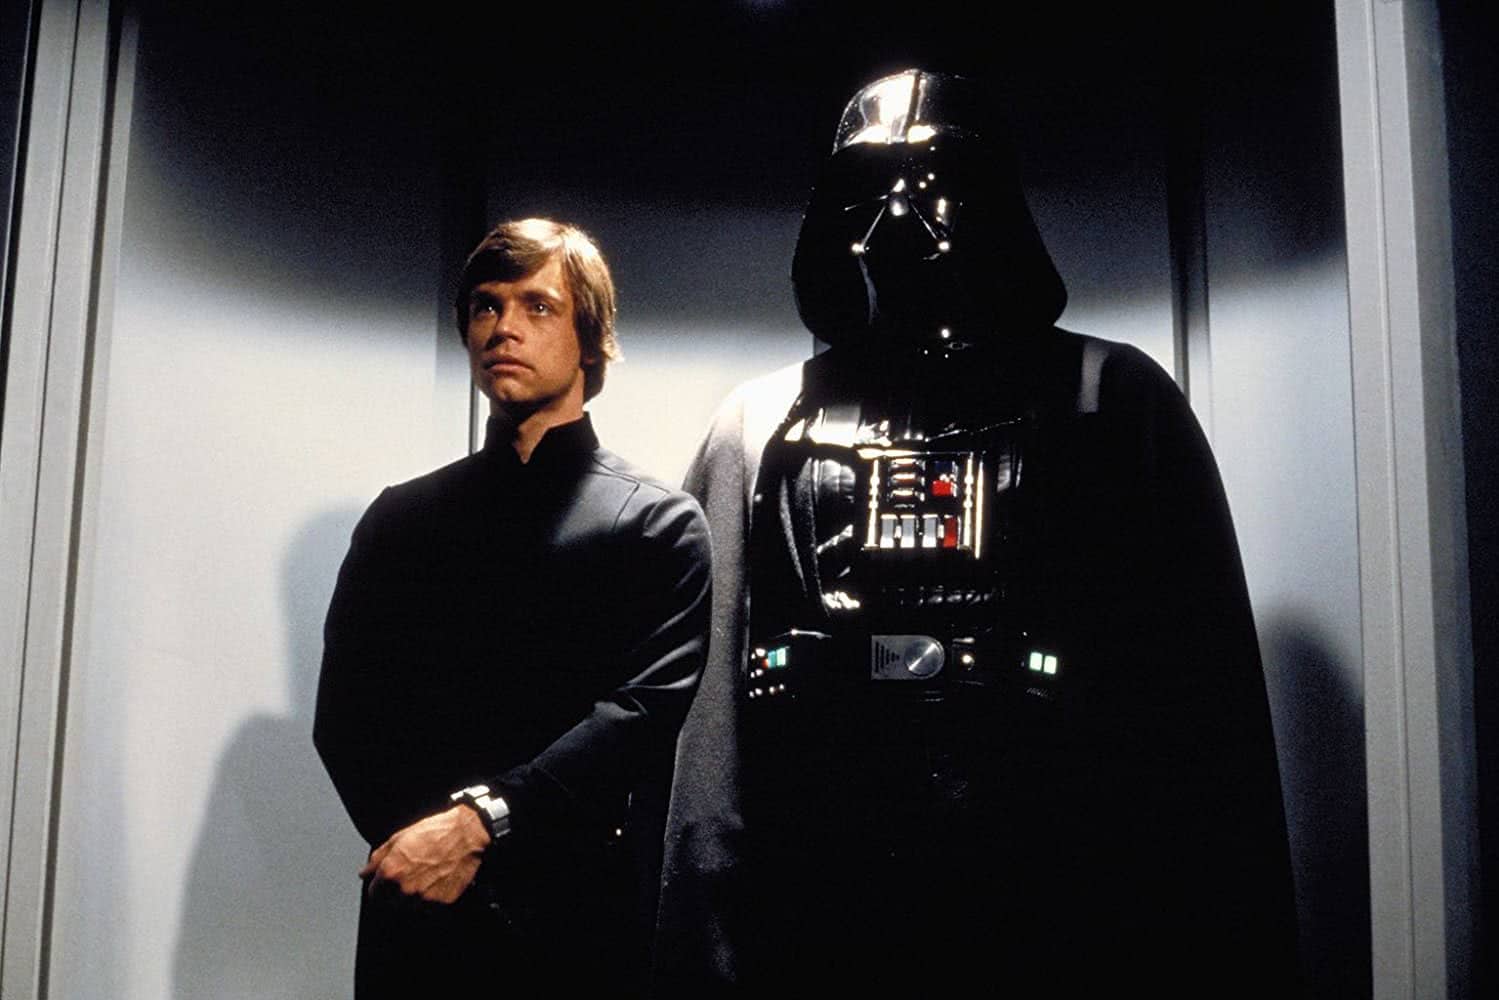 Luke Skywalker (Mark Hamill) and Darth Vader in Return of the Jedi (Reproduction)